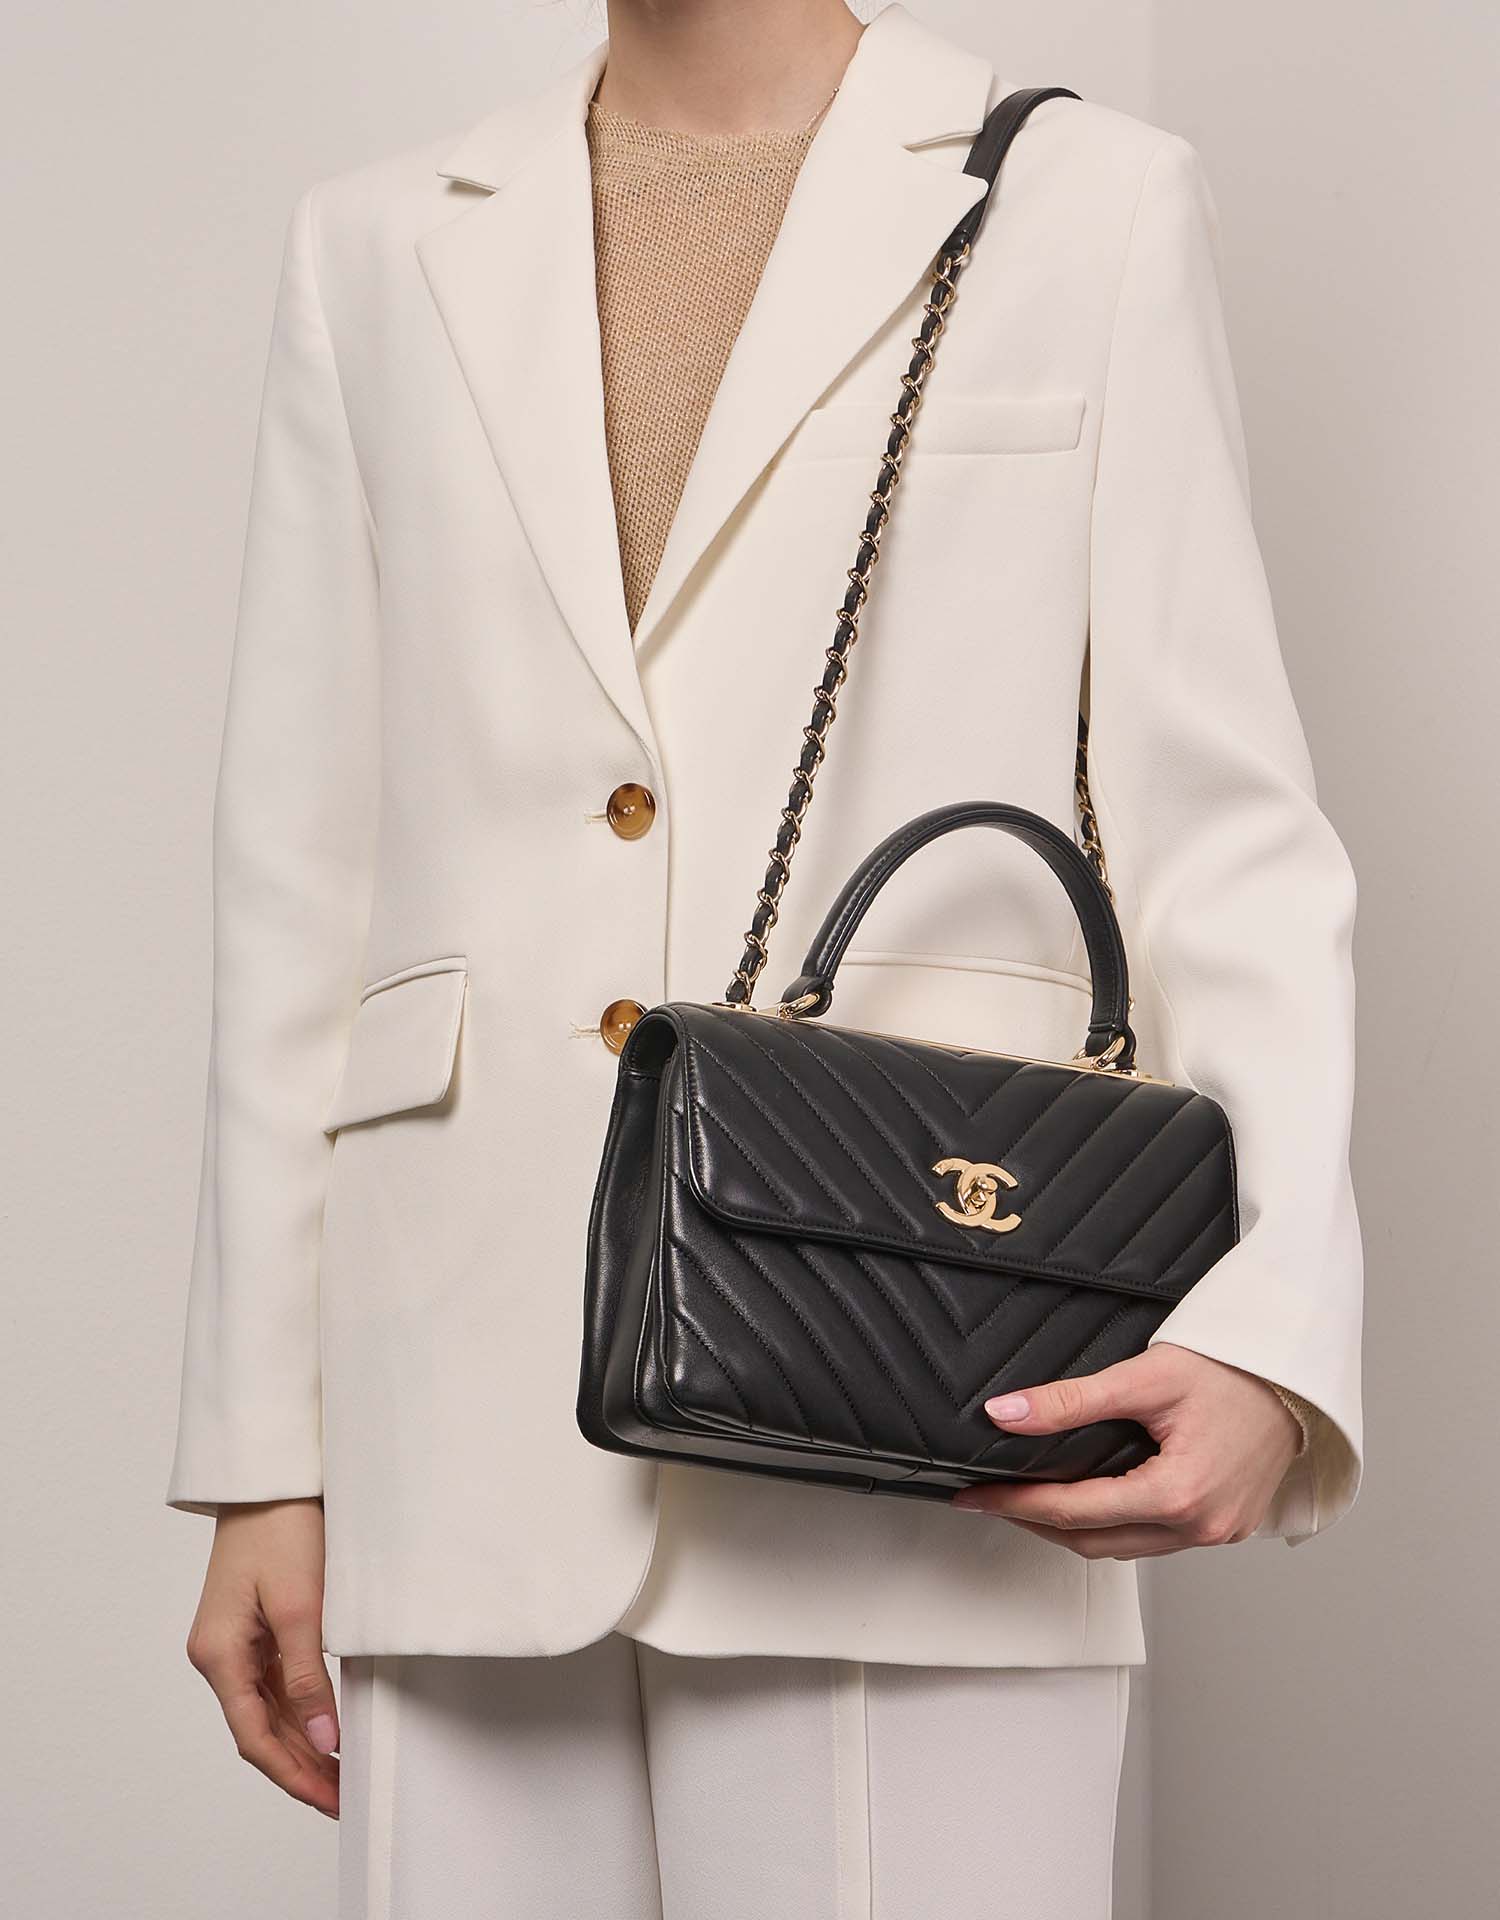 chanel trendy bags